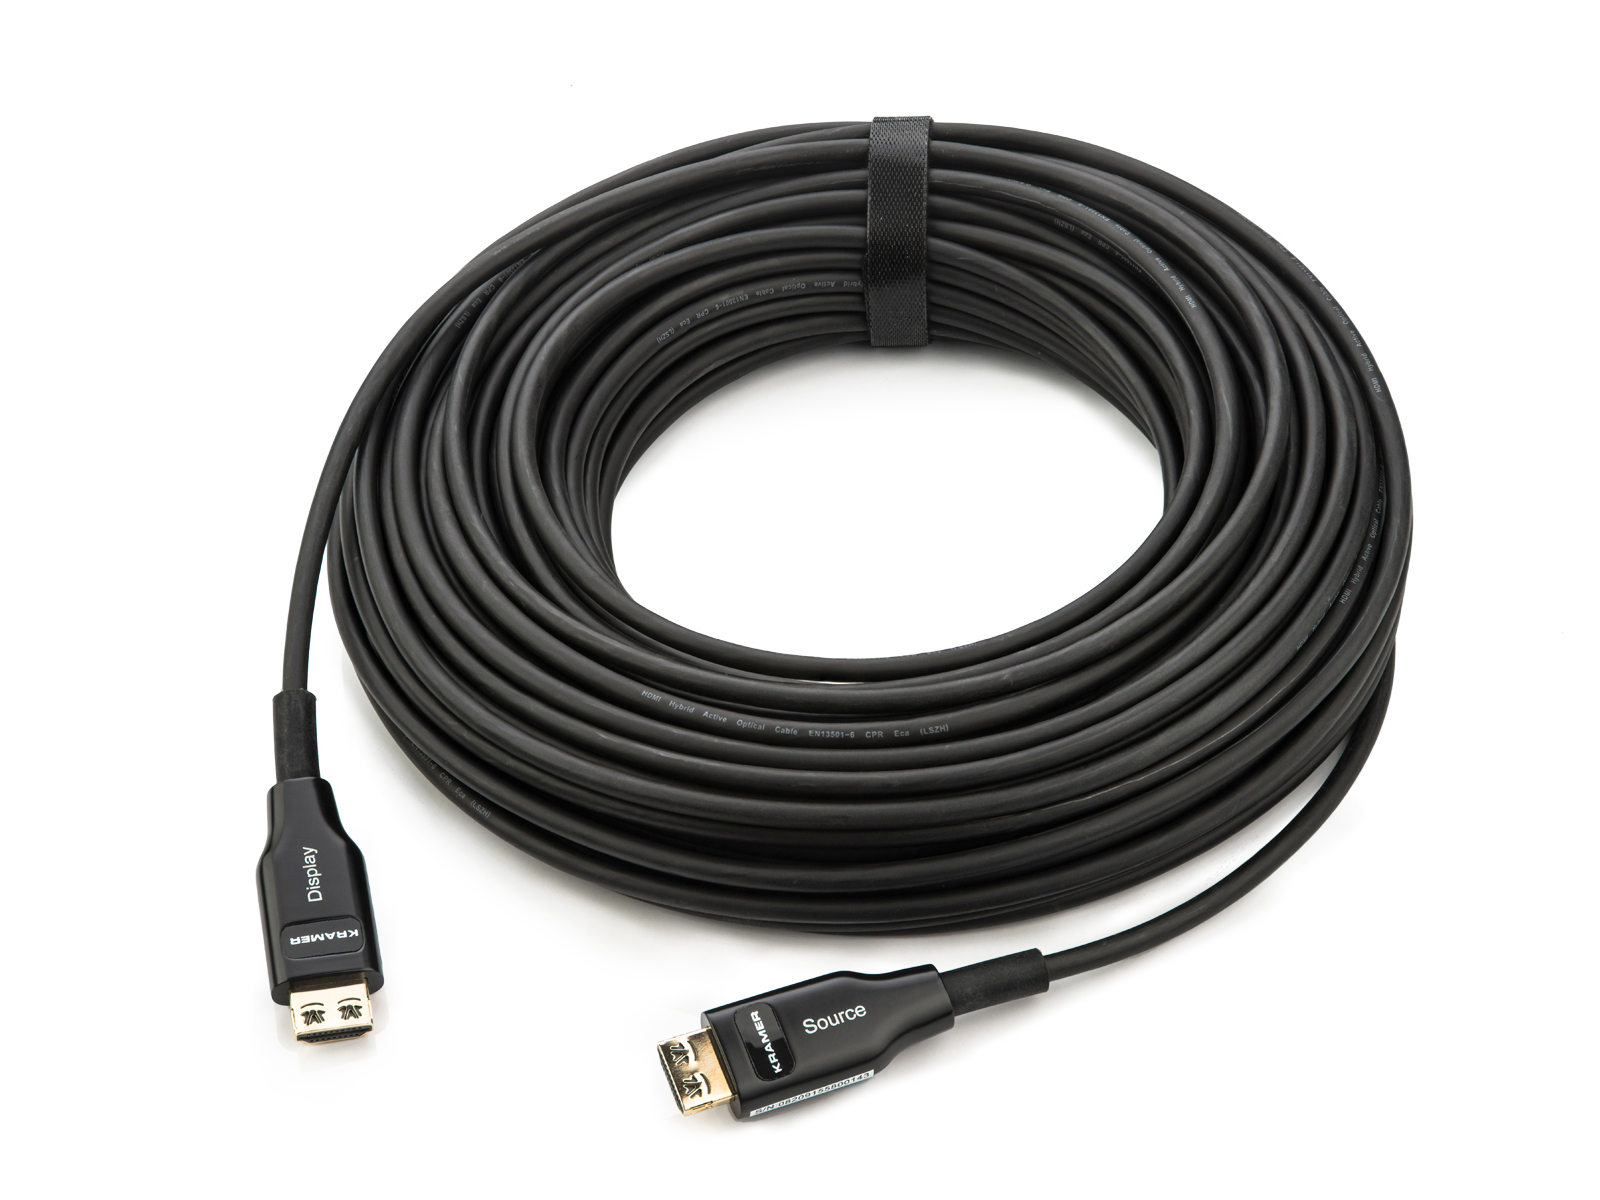 CP-AOCH/60F-66 20m/66ft High-Speed HDMI Optic Hybrid Cable - Plenum Rated by Kramer